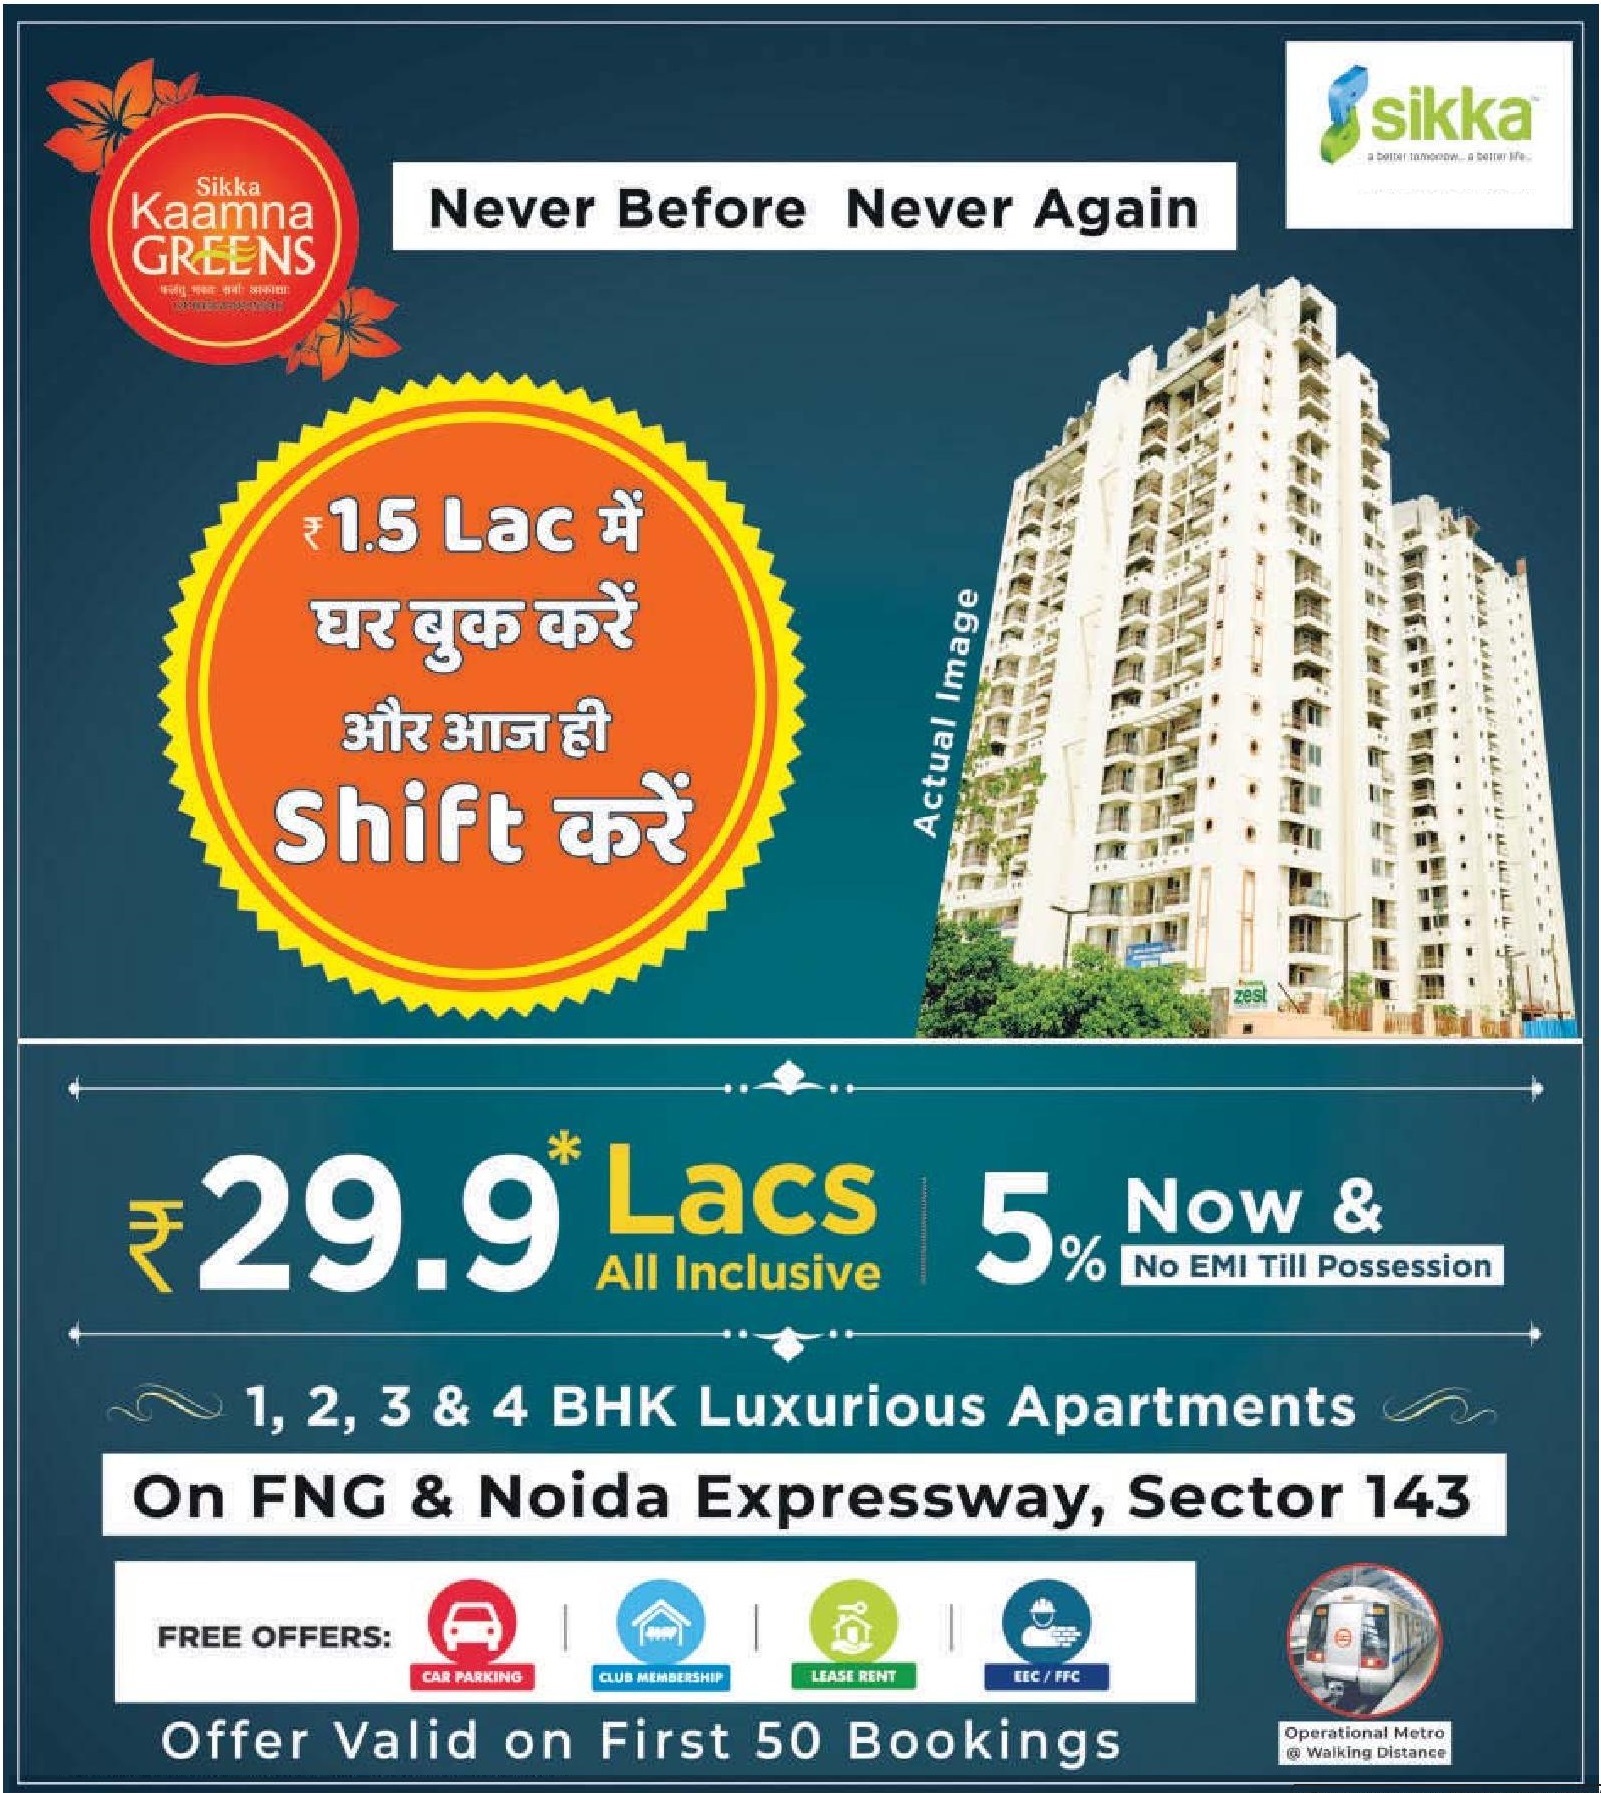 Book 1, 2, 3, 4 bhk luxurious apartments at Sikka Kaamna Greens in Noida Update